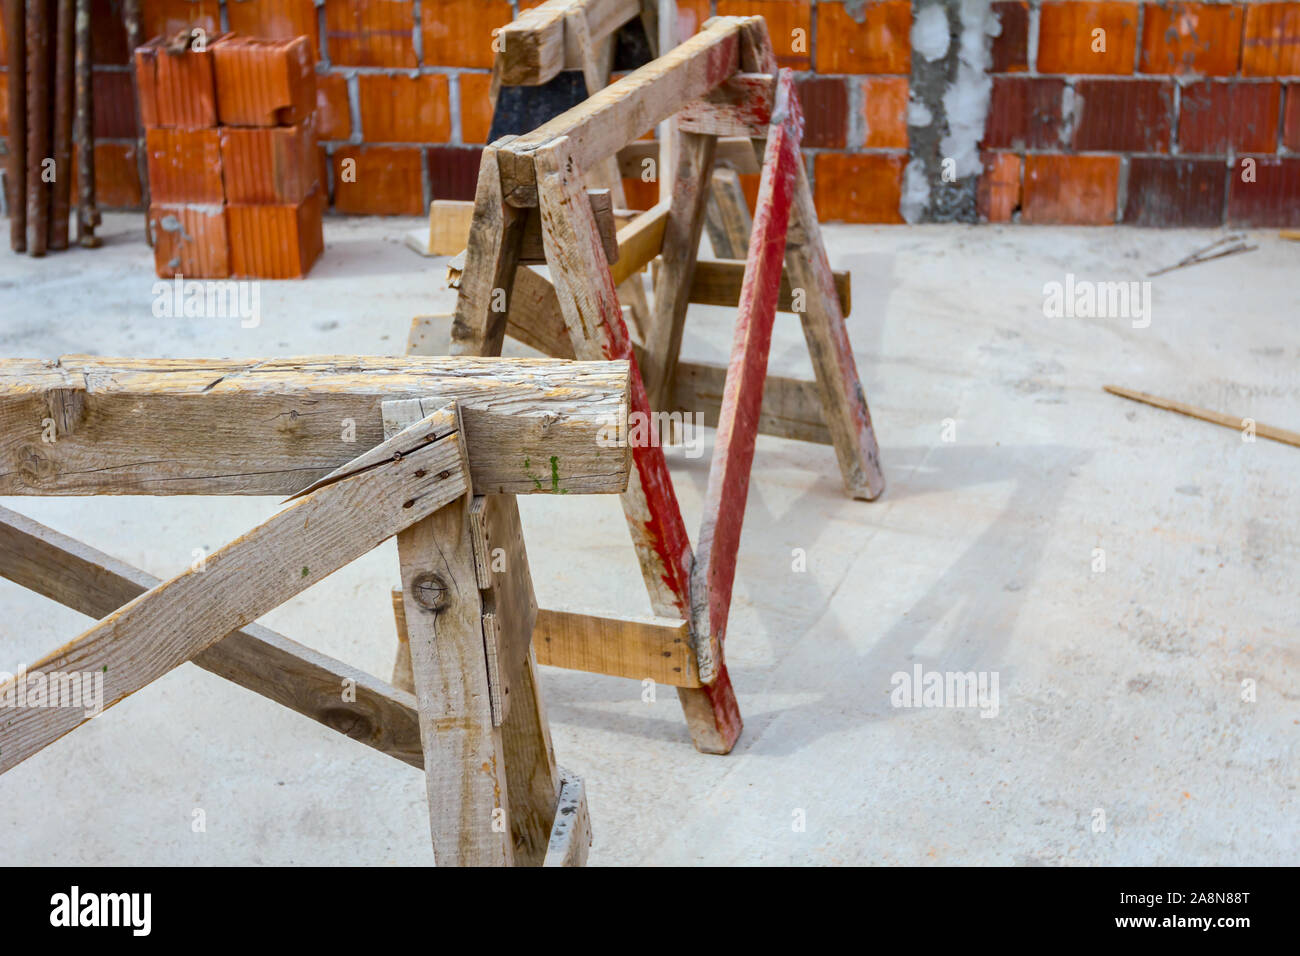 Wooden frame truss made of beams for mobile scaffold at building site, under construction. Stock Photo